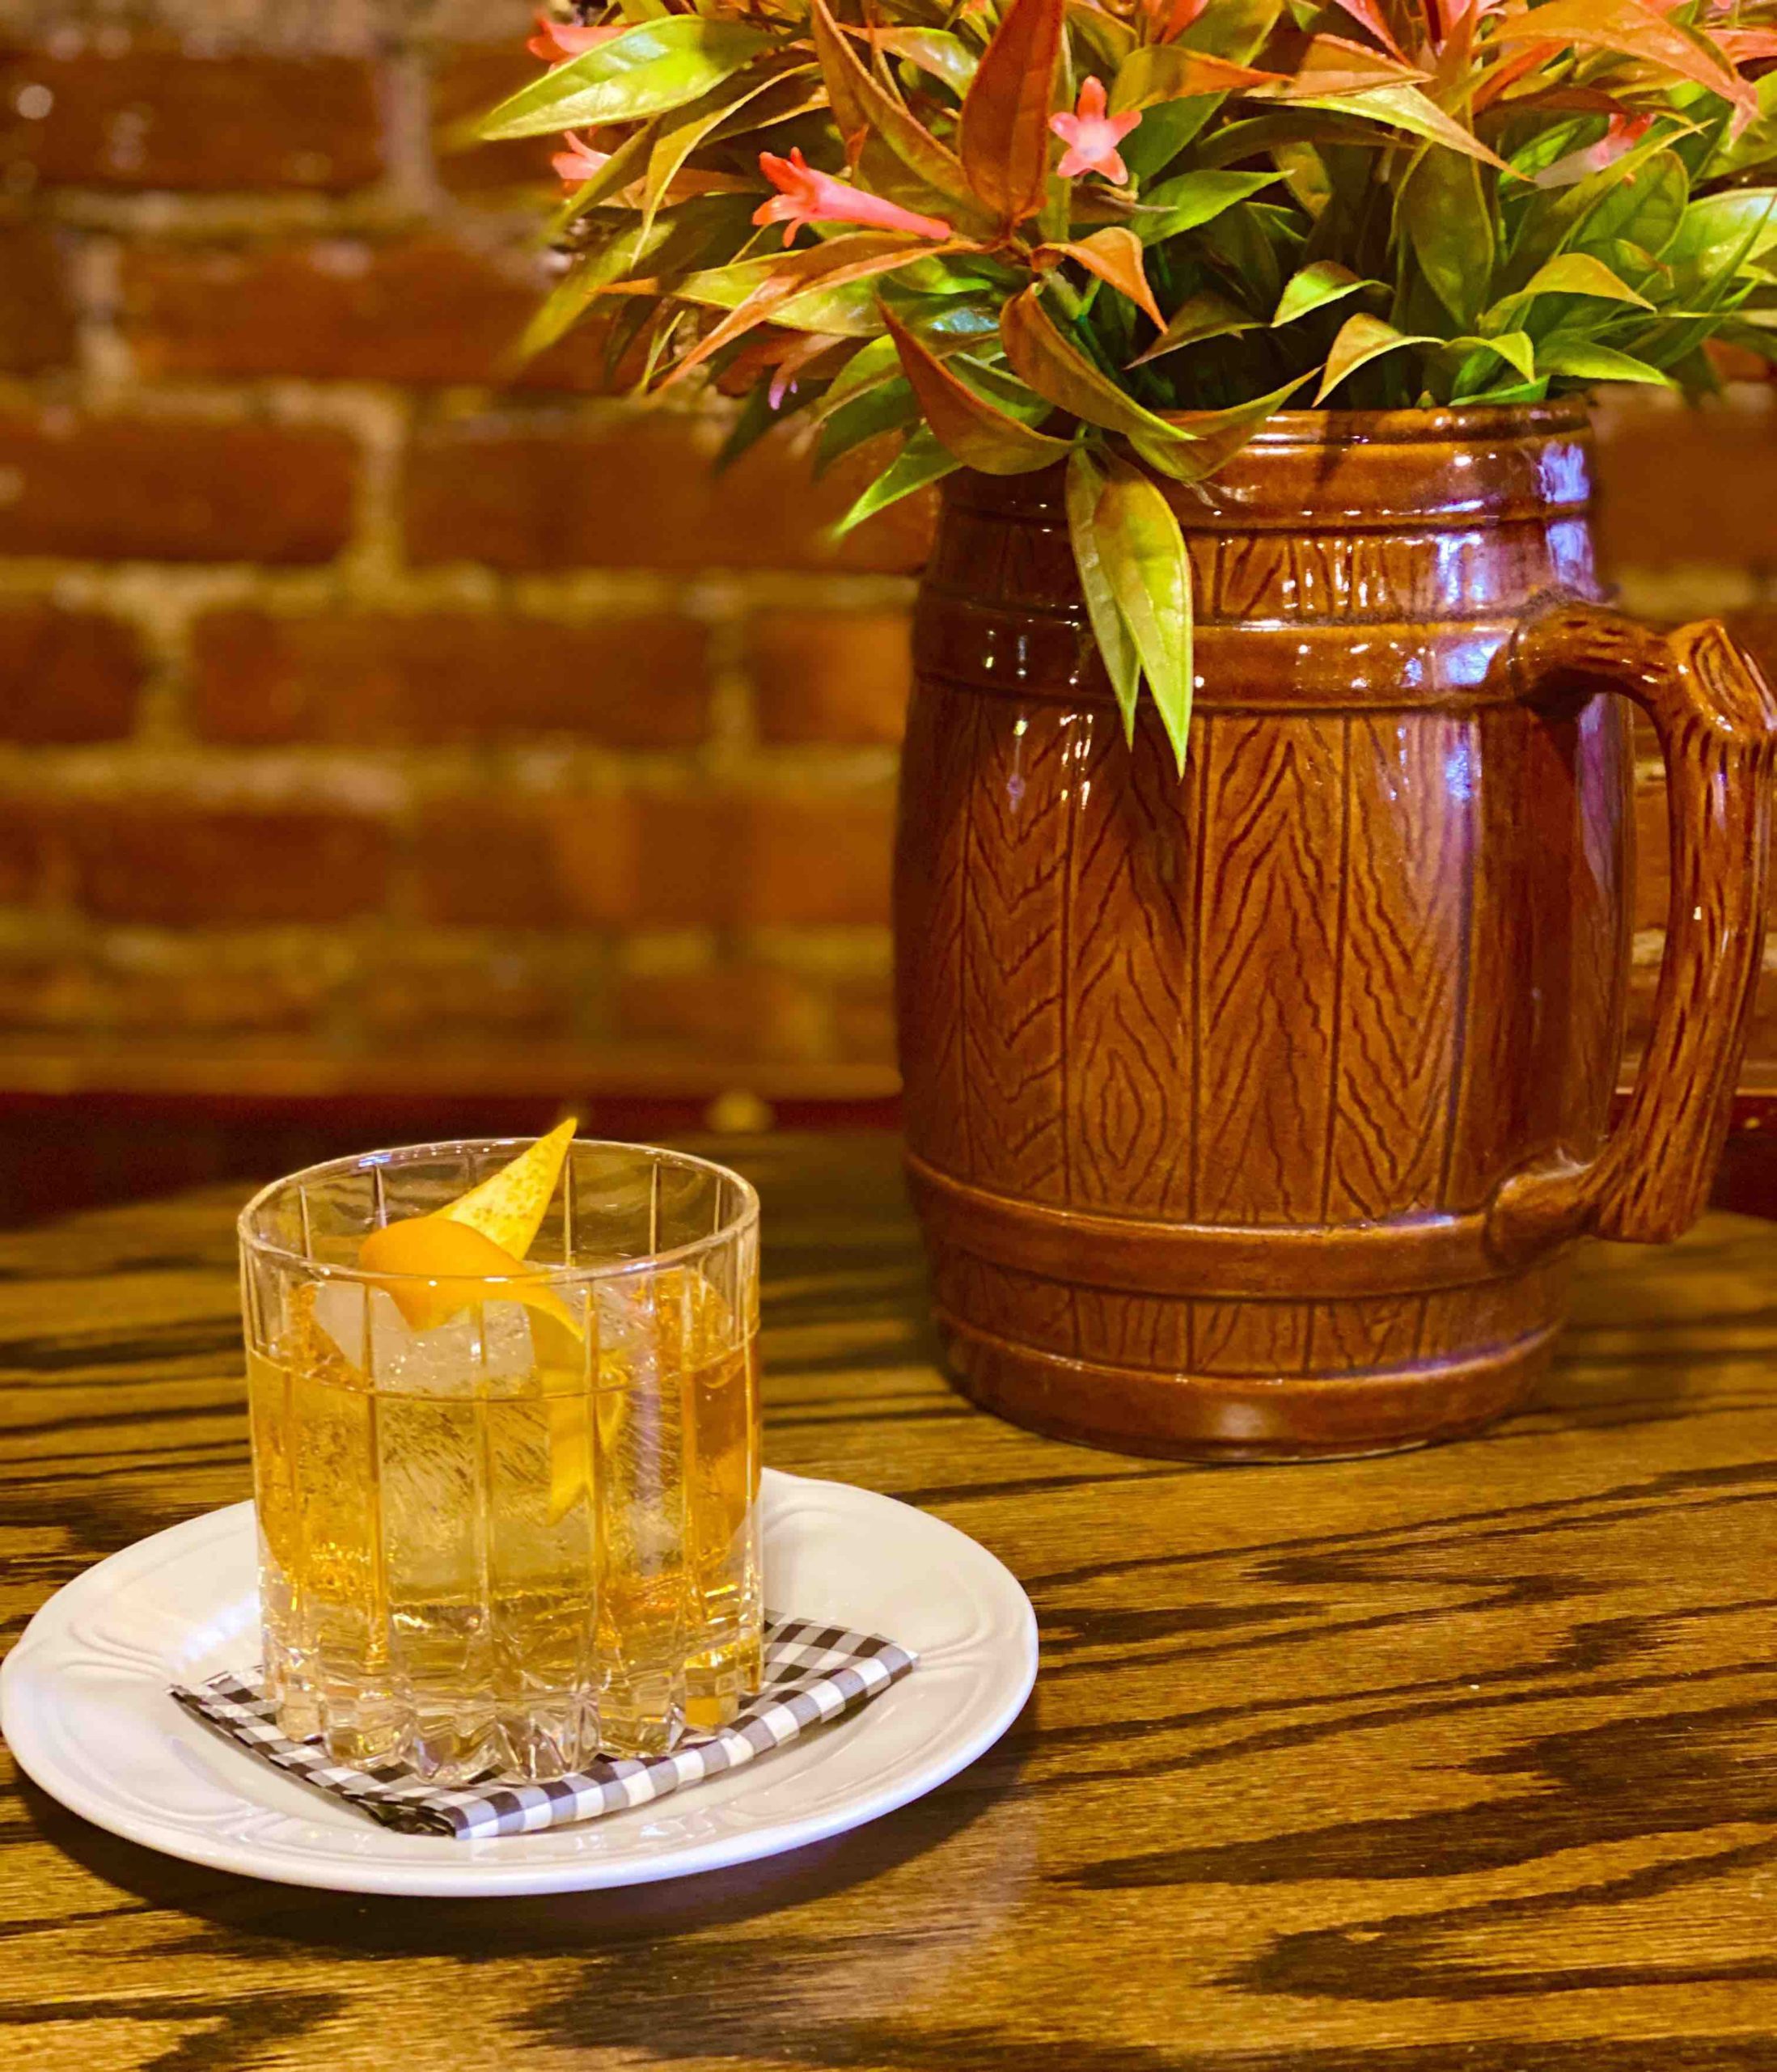 This Cocktail At Spaghetti Tavern Is Where to Find the Best Time For Happy Hour In NYC